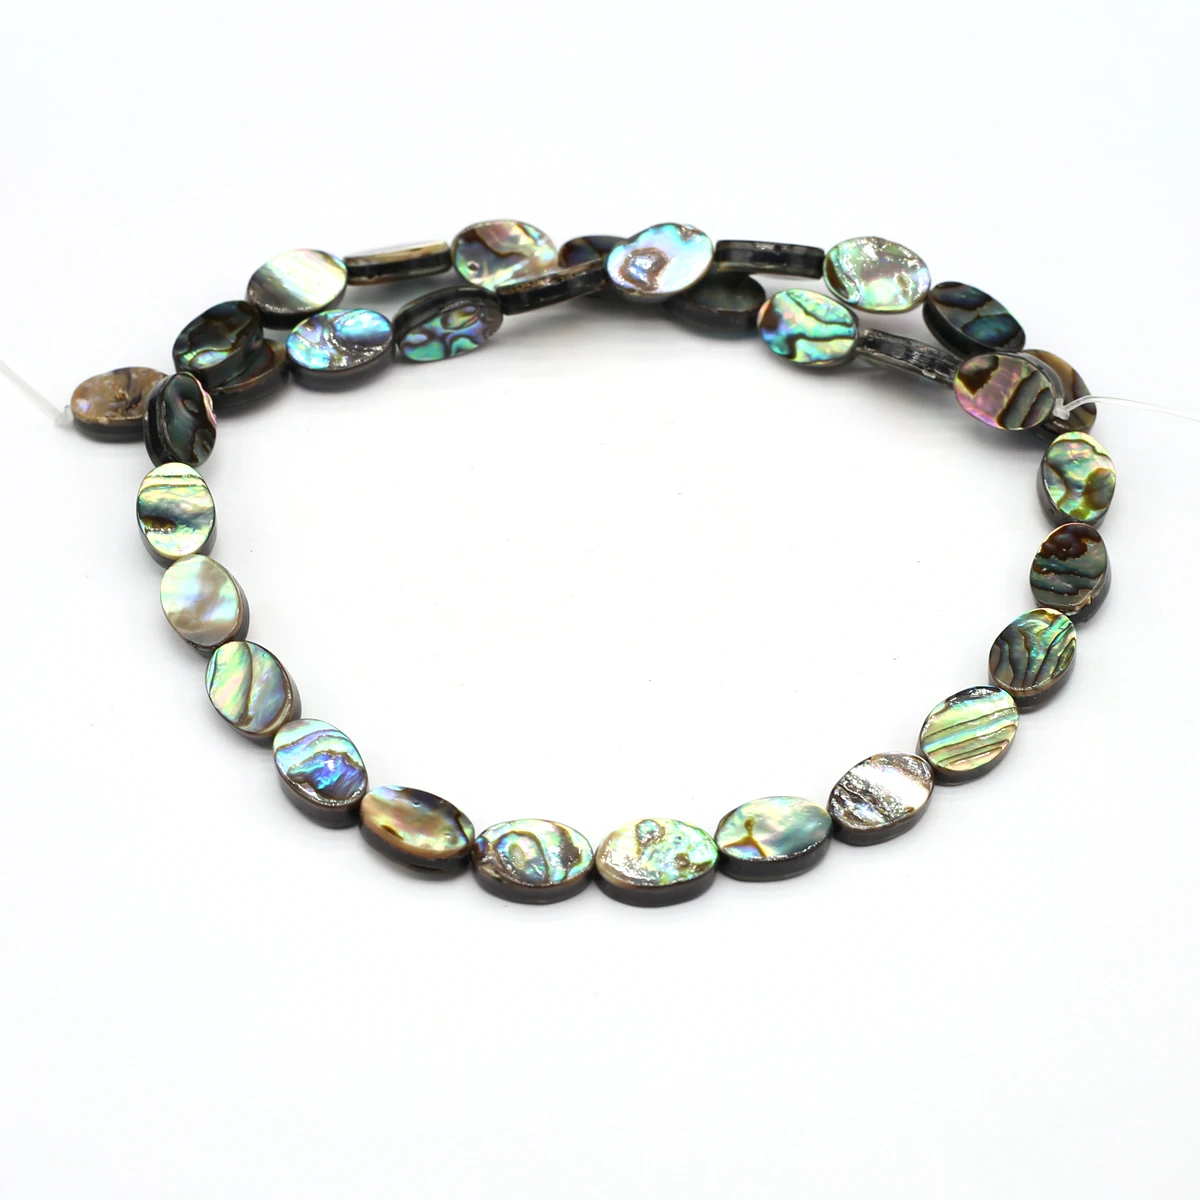 Купи Natural Abalone Shell Beads Oval Mother of Pearl Shells Loose Beads for Jewelry Making DIY Necklace Accessories Handmade Crafts за 938 рублей в магазине AliExpress